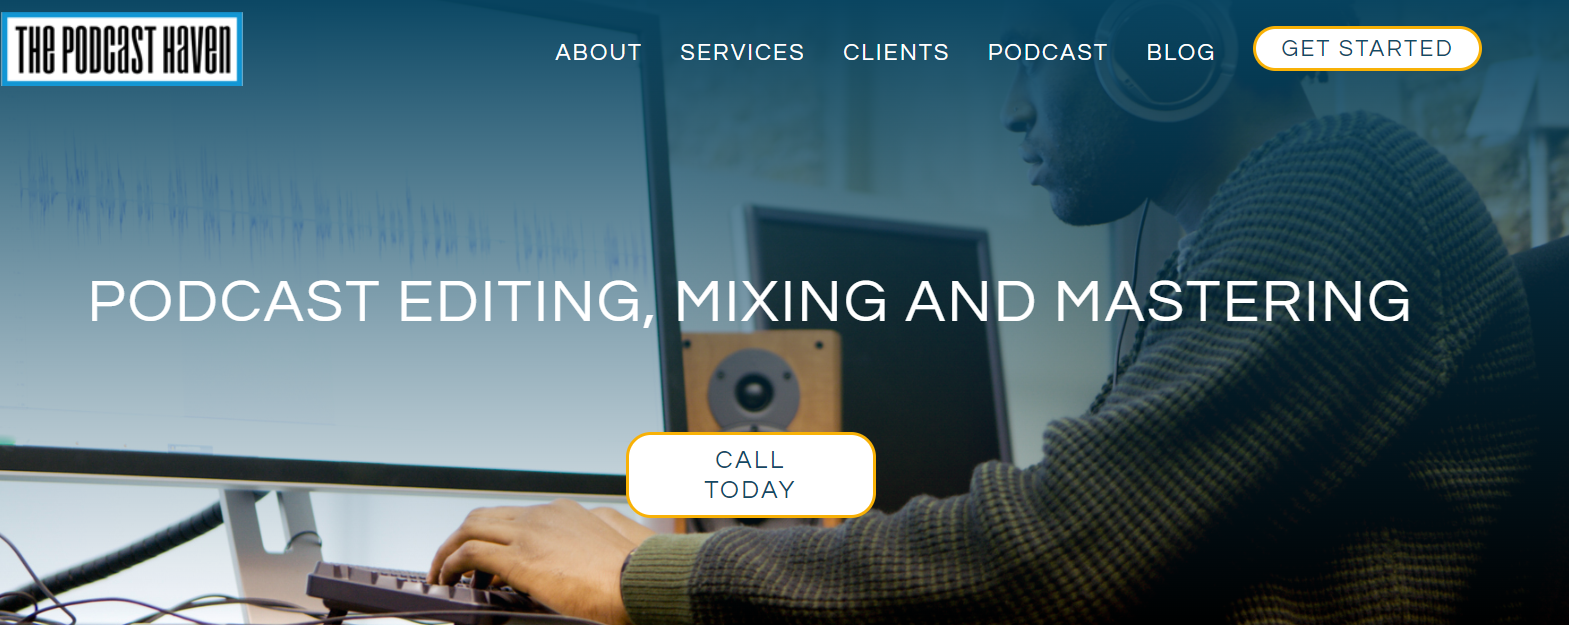 Podcast Haven podcast editing company homepage